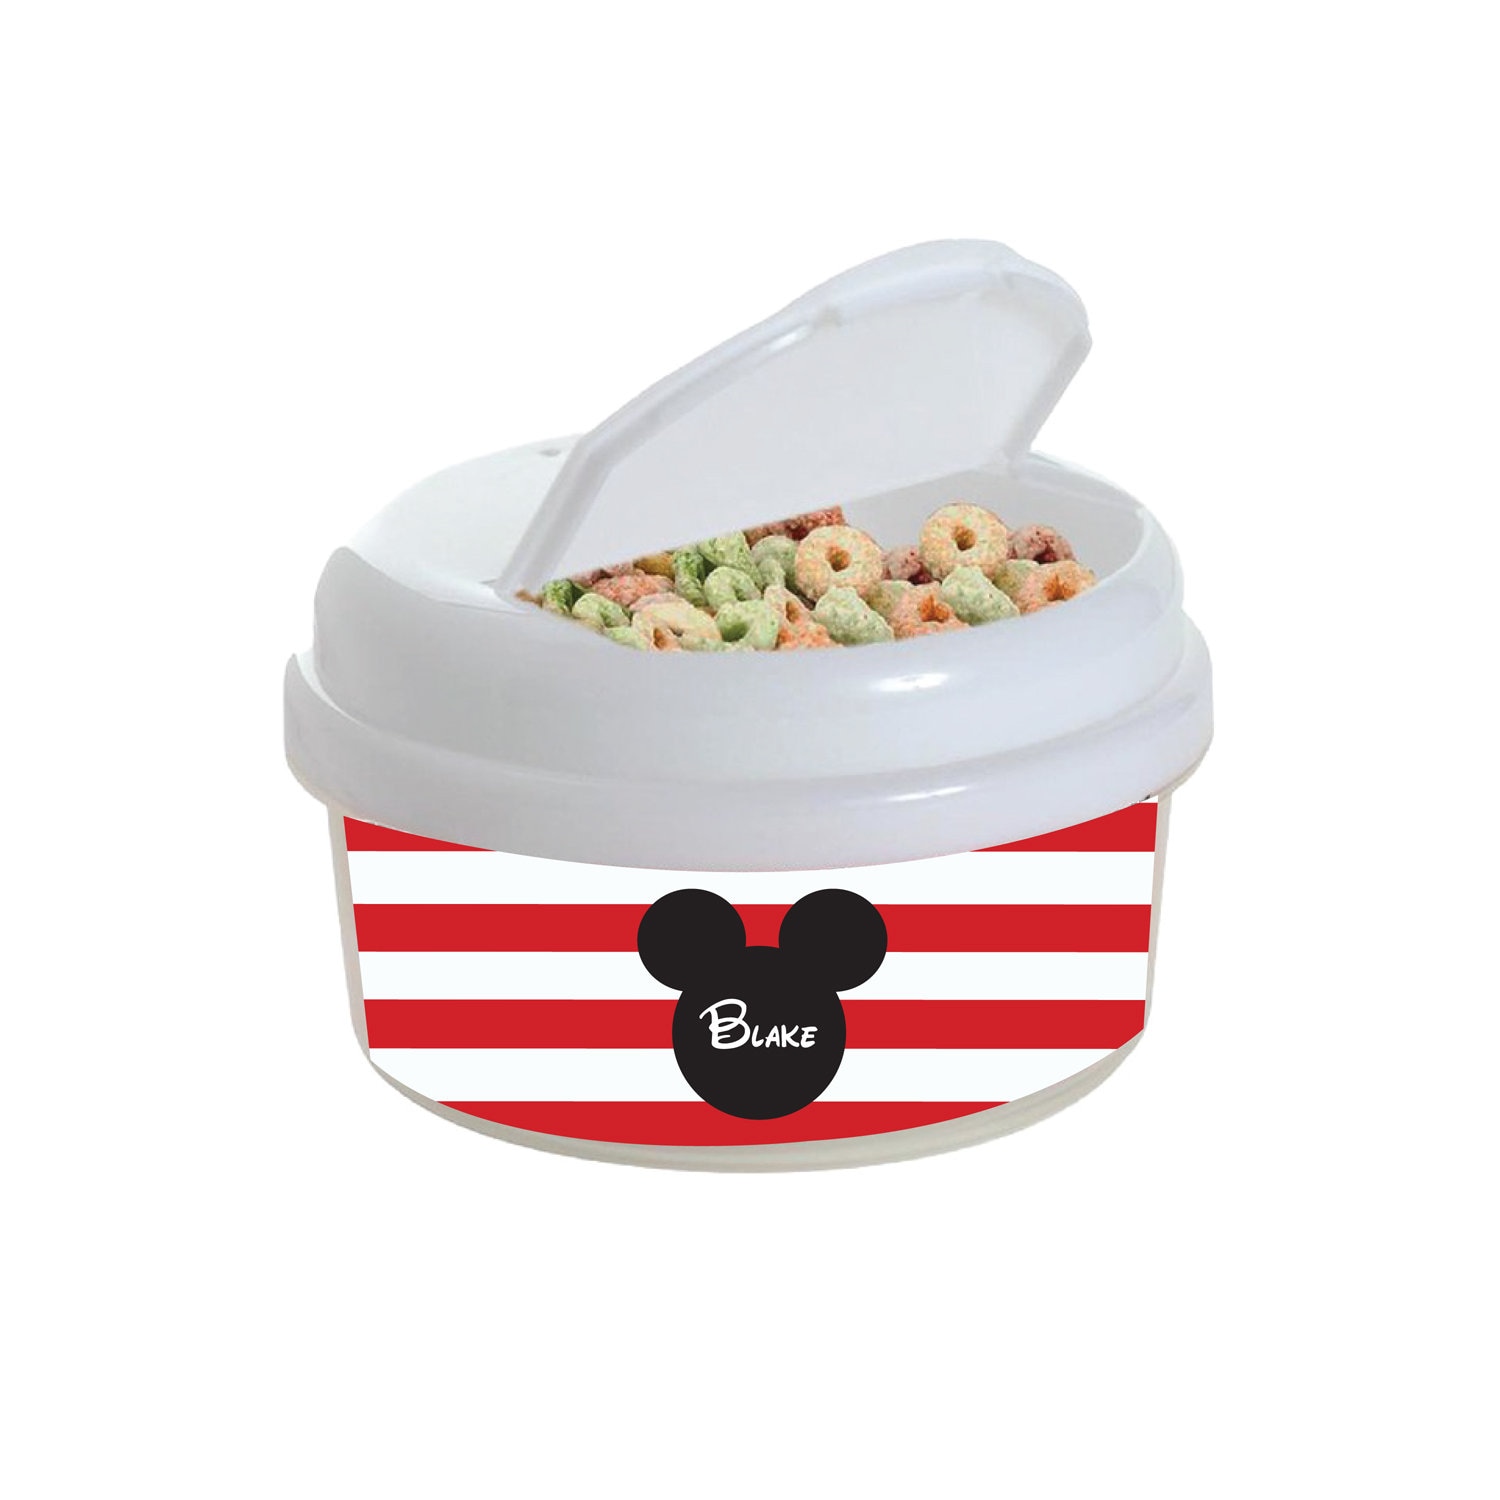 Baby Products Online - Solid Colors Toddler Baby Snack Cup Portable Food  Storage Box Bpa Silicone Snack Container with Lid - Kideno